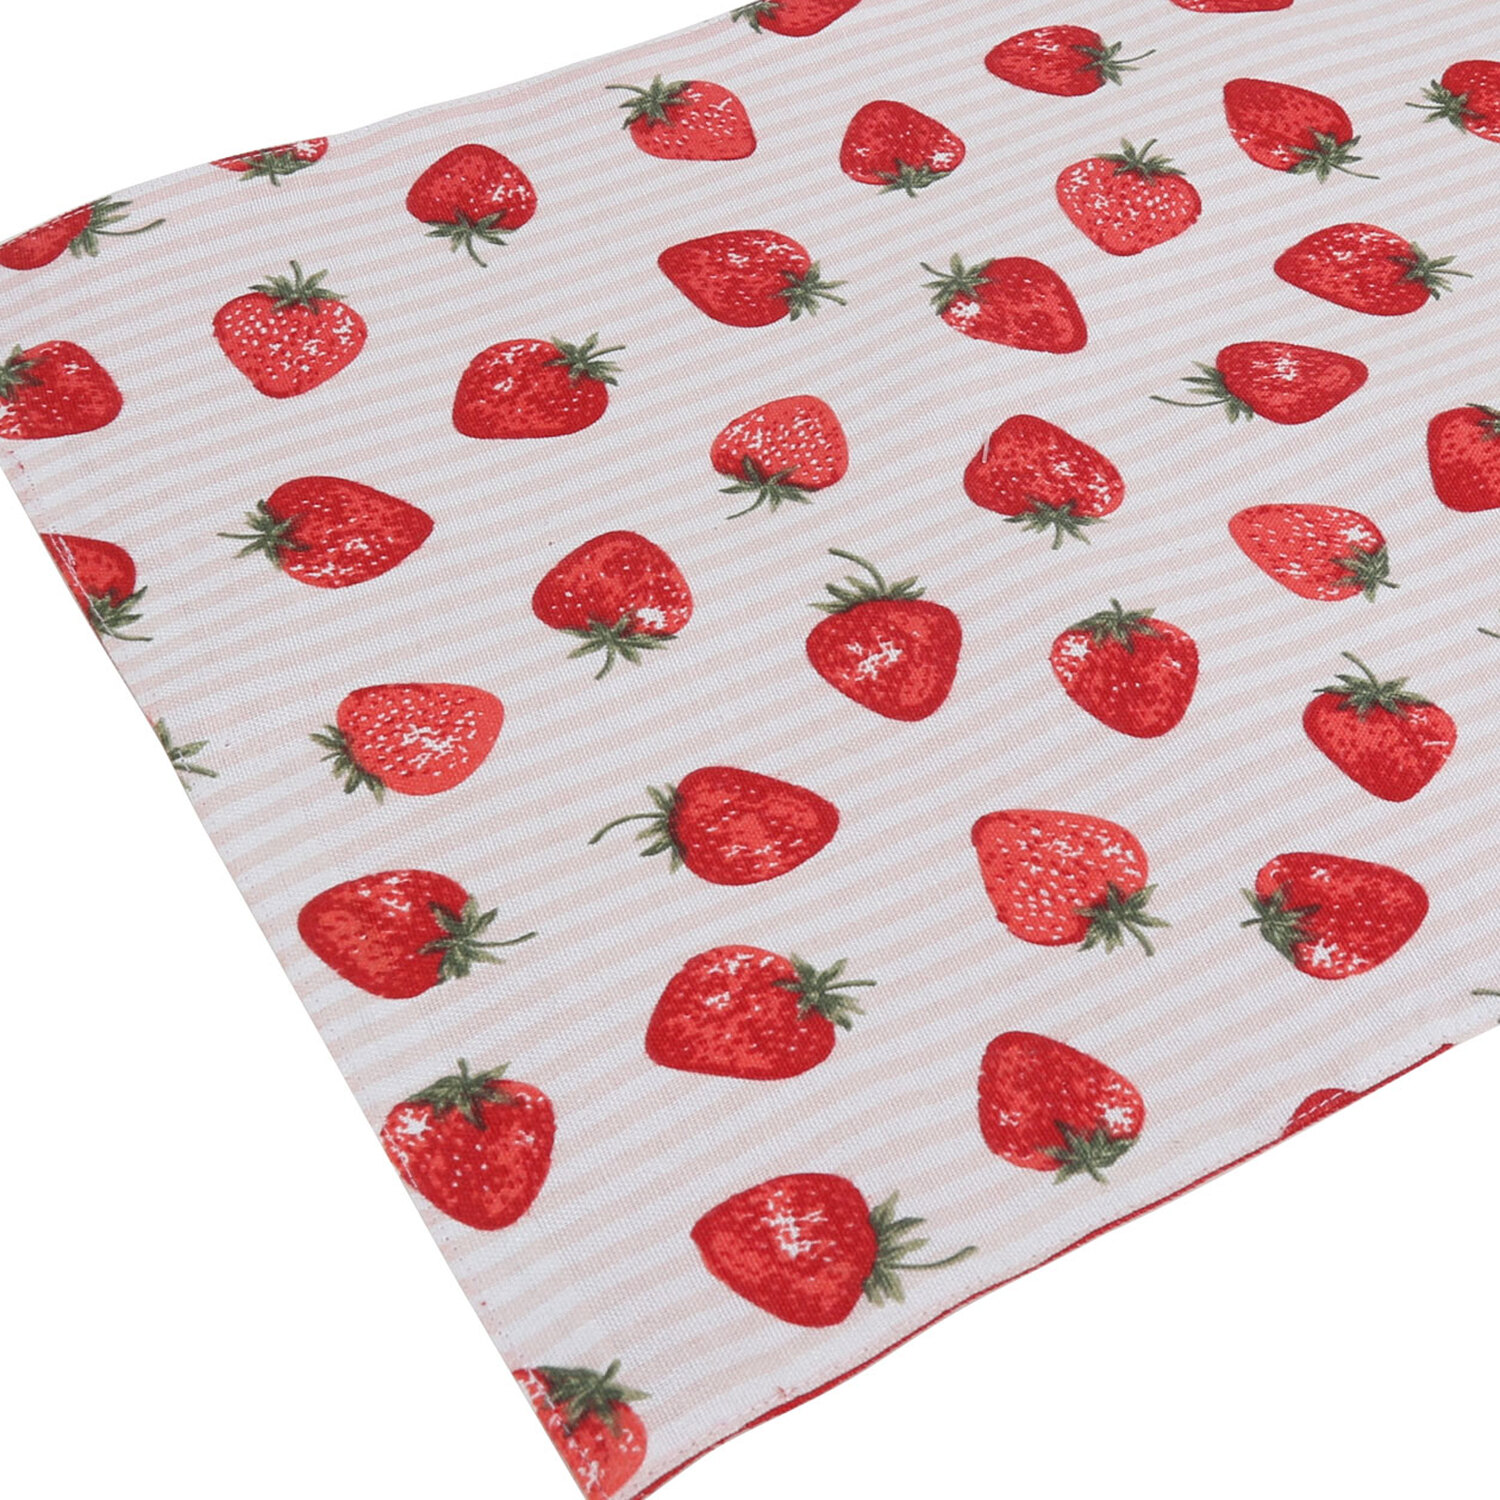 Strawberry Table Runner - Red Image 4